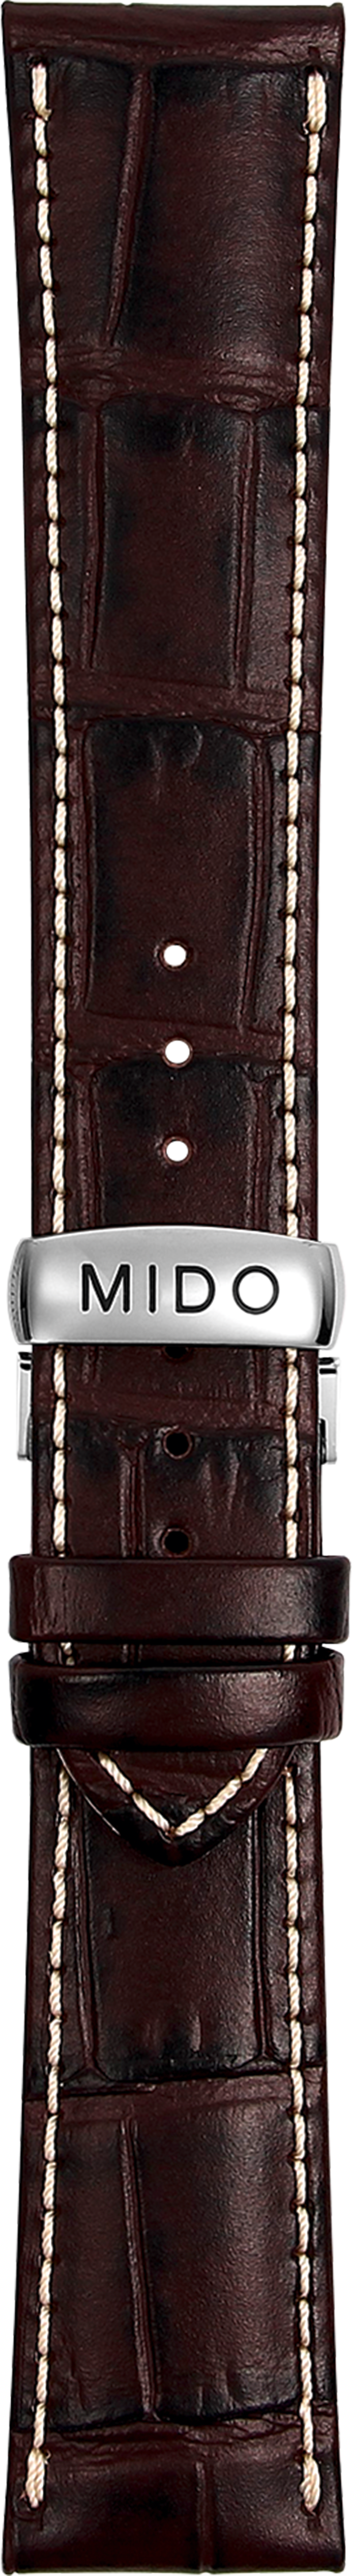 Mido Commander brown cowhide leather strap